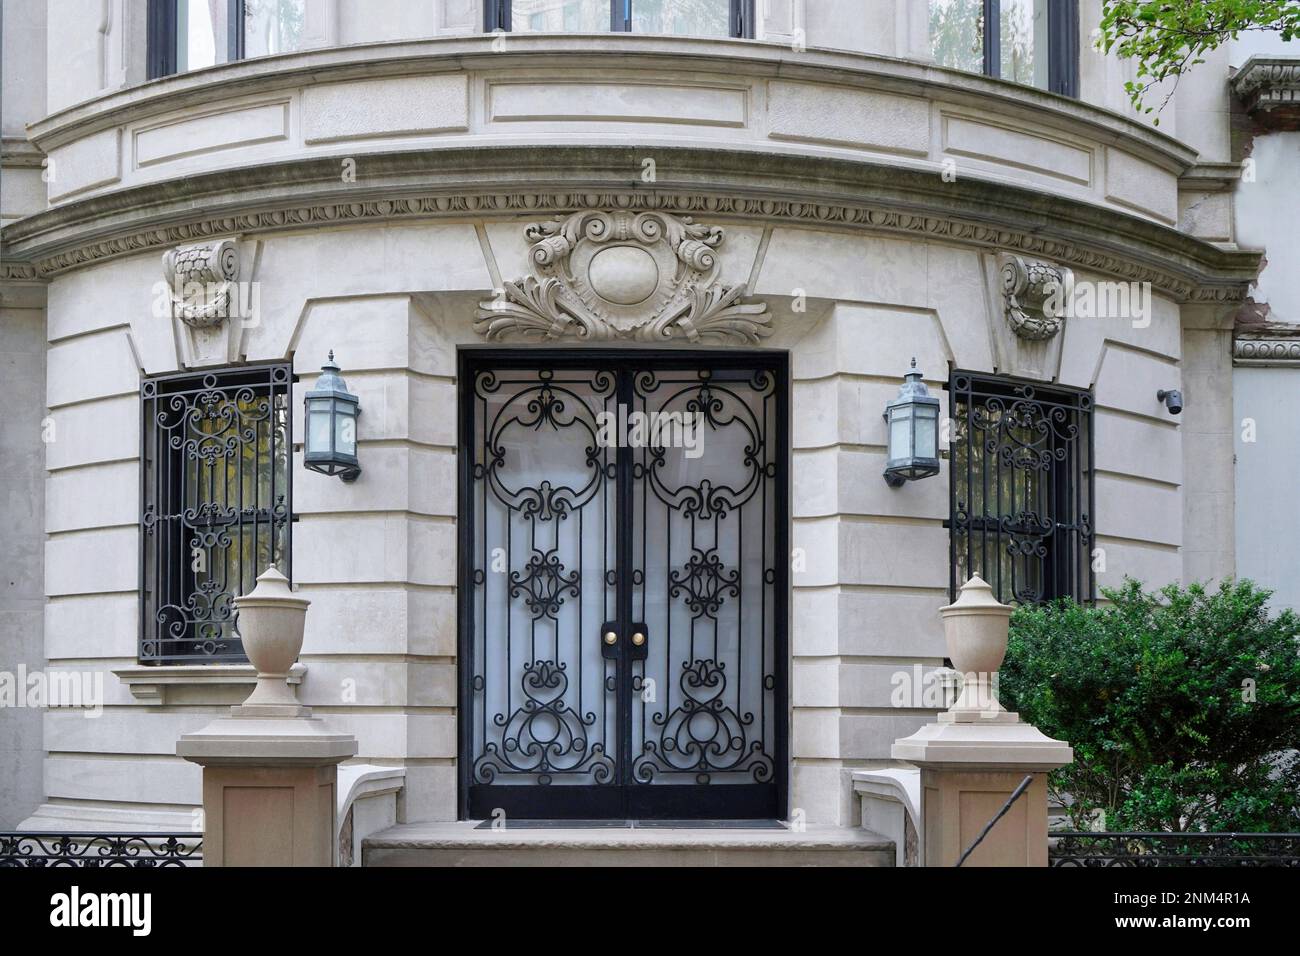 Entrance to elegant baroque style apartment building or townhouse, with decorative and protective iron grill on windows Stock Photo